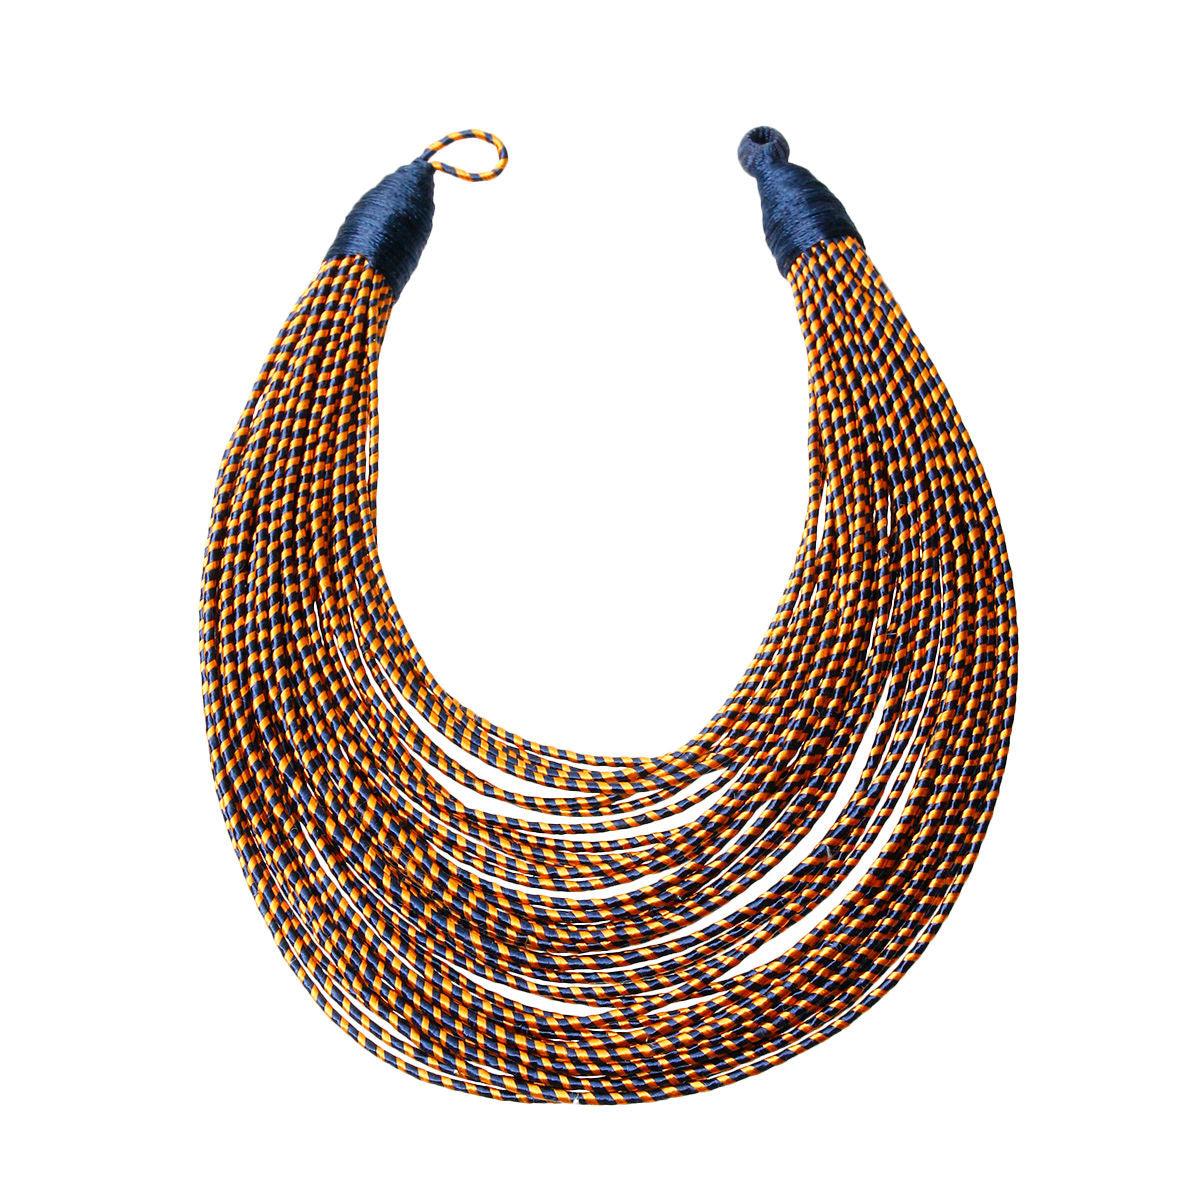 Dazzle 'em: Must-Have Multi Fab Statement Necklace for You!